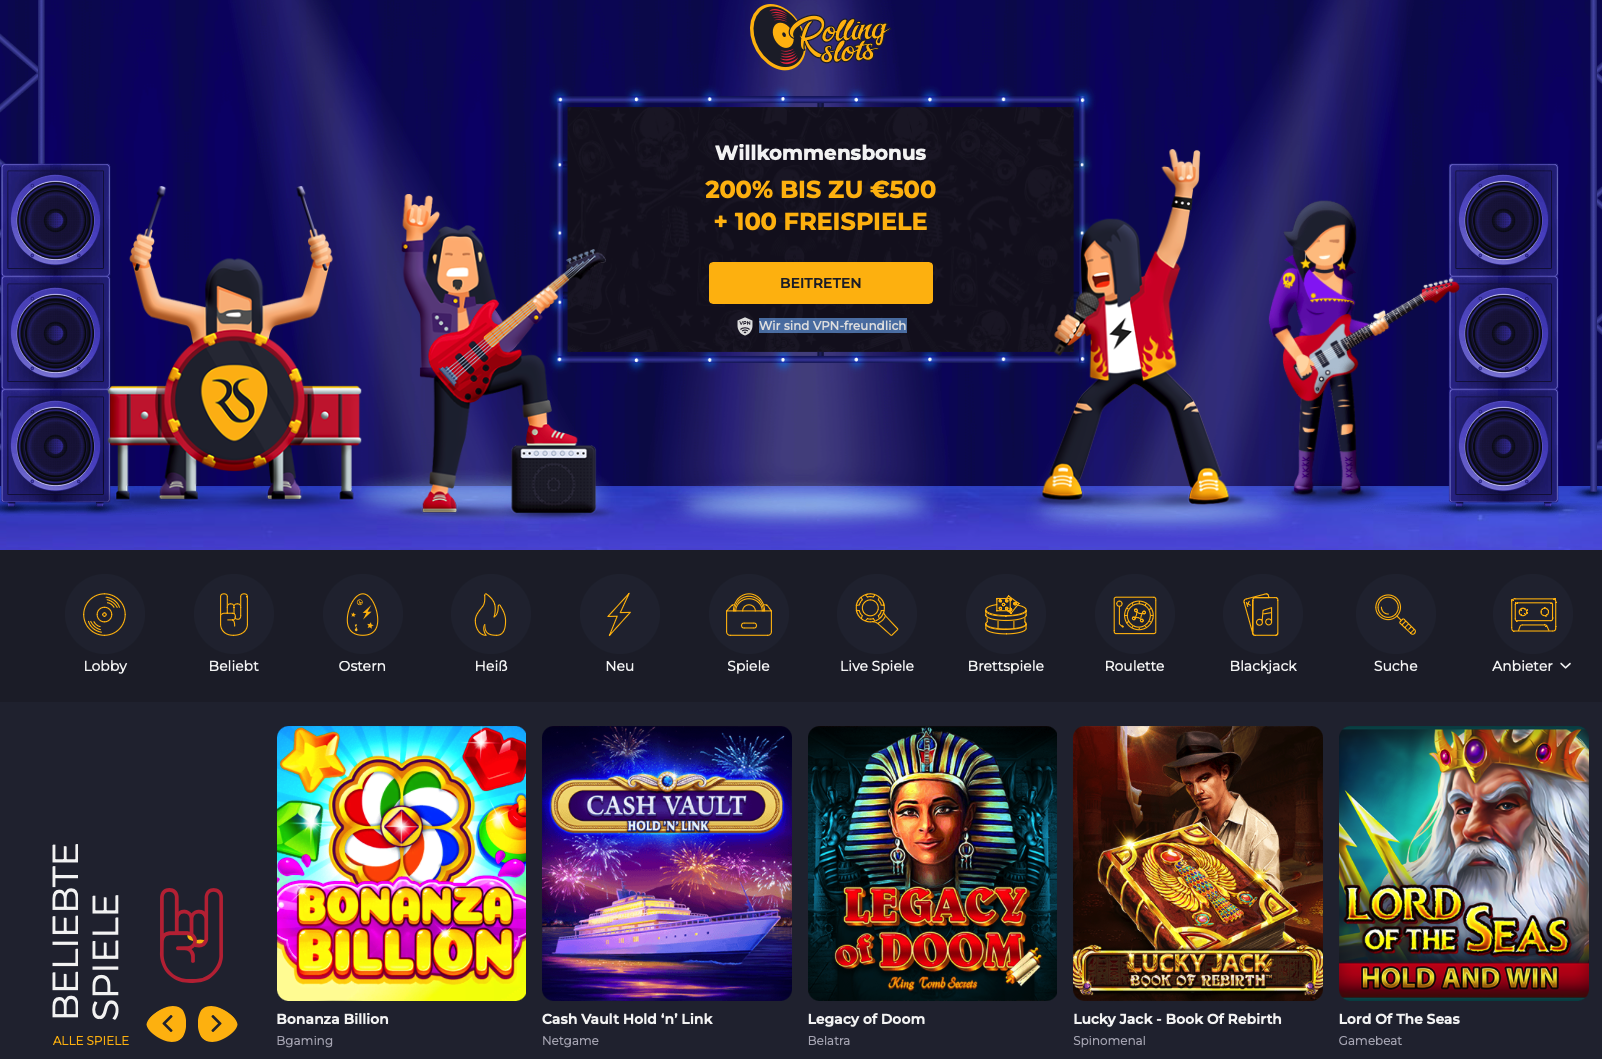 Who Else Wants To Be Successful With Online Casino Echtgeld spielen in 2023